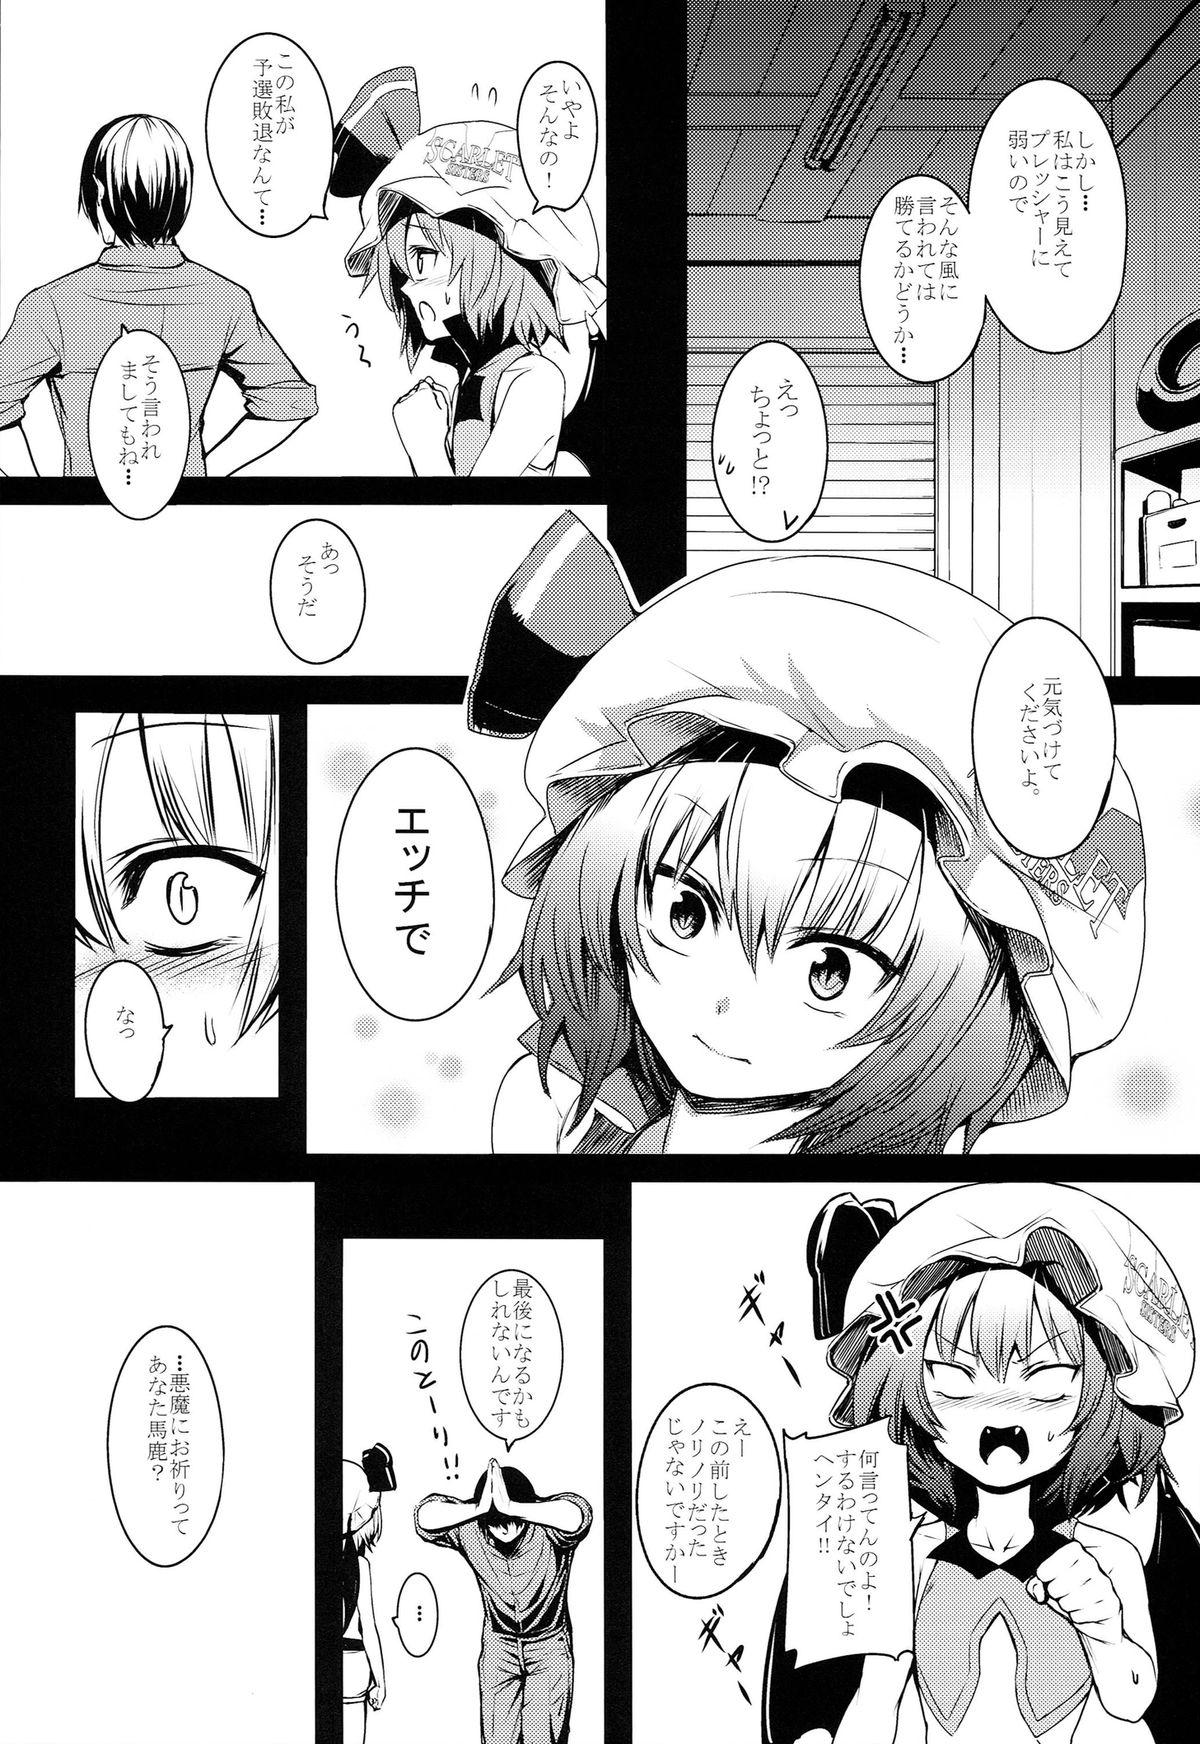 Masturbate TOUHOU RACE QUEENS COLLABO CLUB - Touhou project Perfect Teen - Page 5